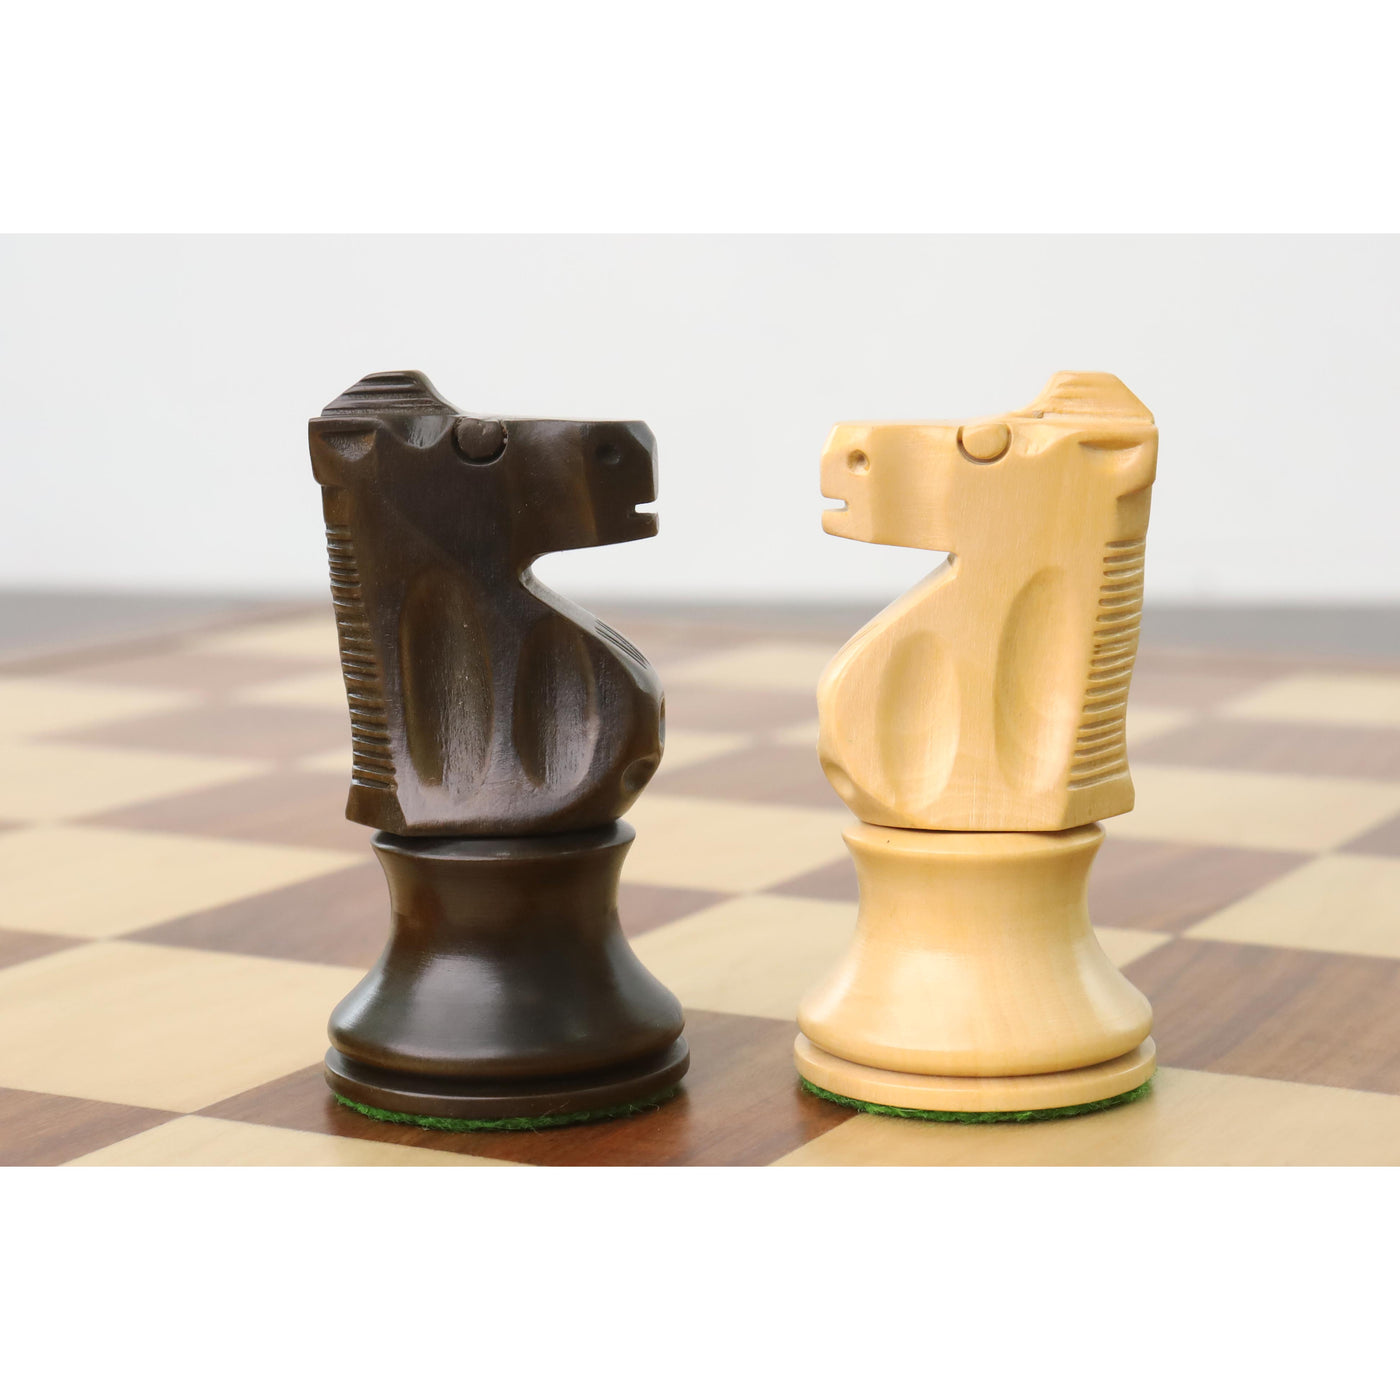 Improved French Lardy Chess Set - Chess Pieces Only - Walnut Stained boxwood - 3.9" King